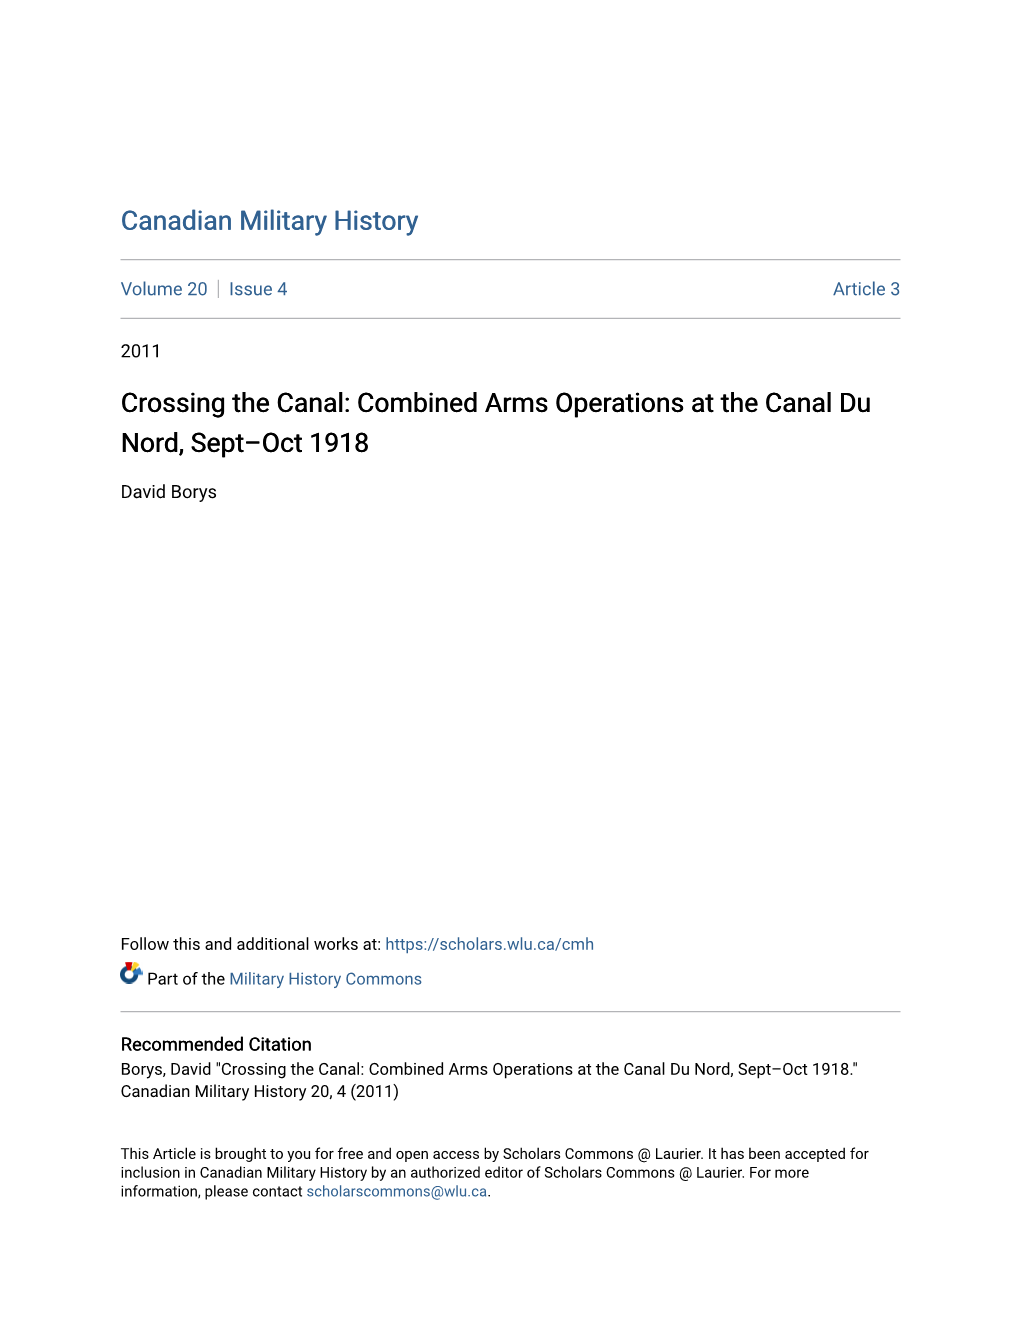 Crossing the Canal: Combined Arms Operations at the Canal Du Nord, Septâ•Fioct 1918